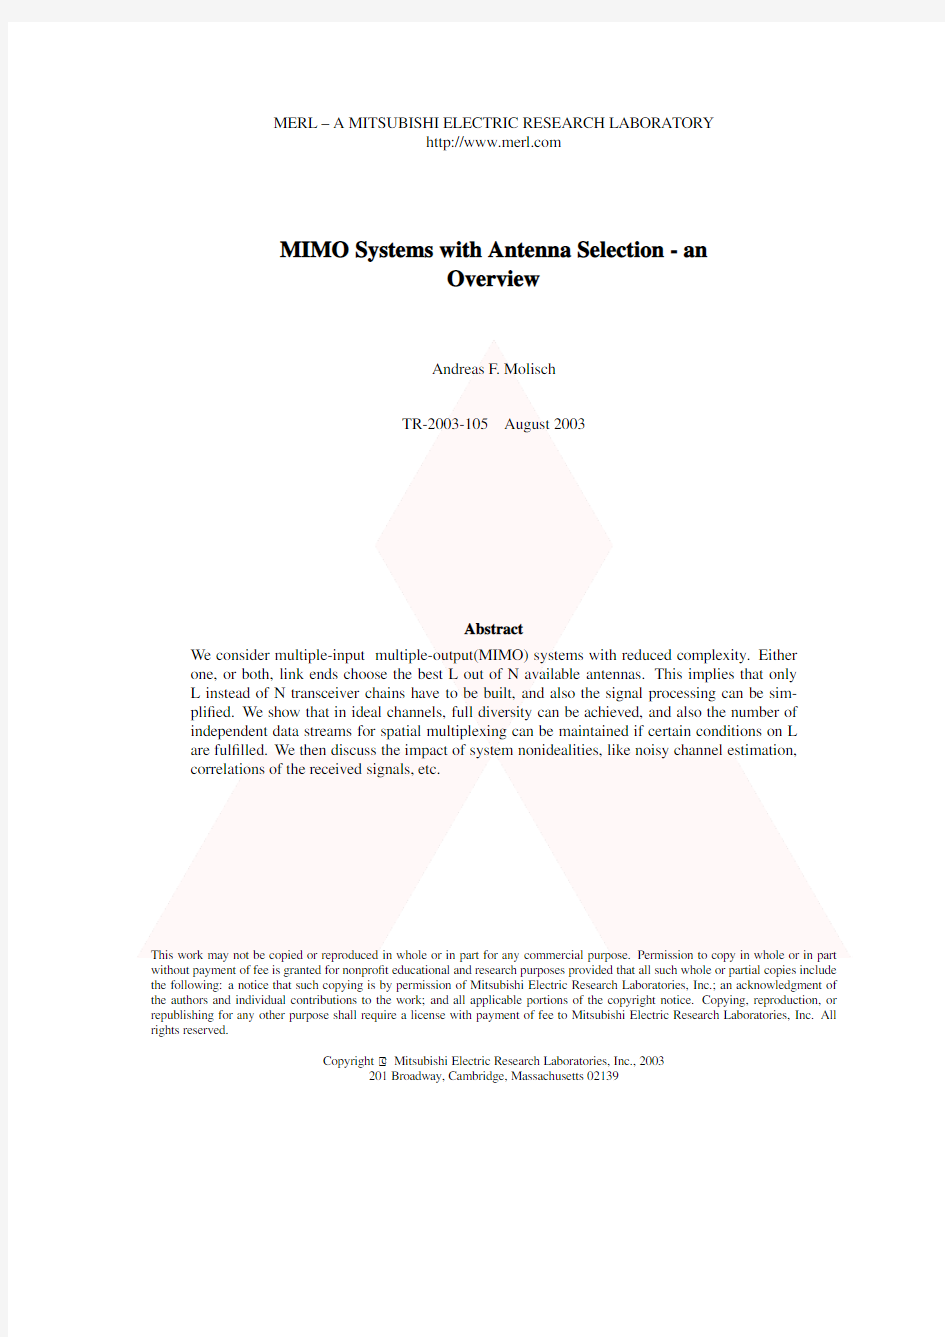 MIMO systems with antenna selection - an overview